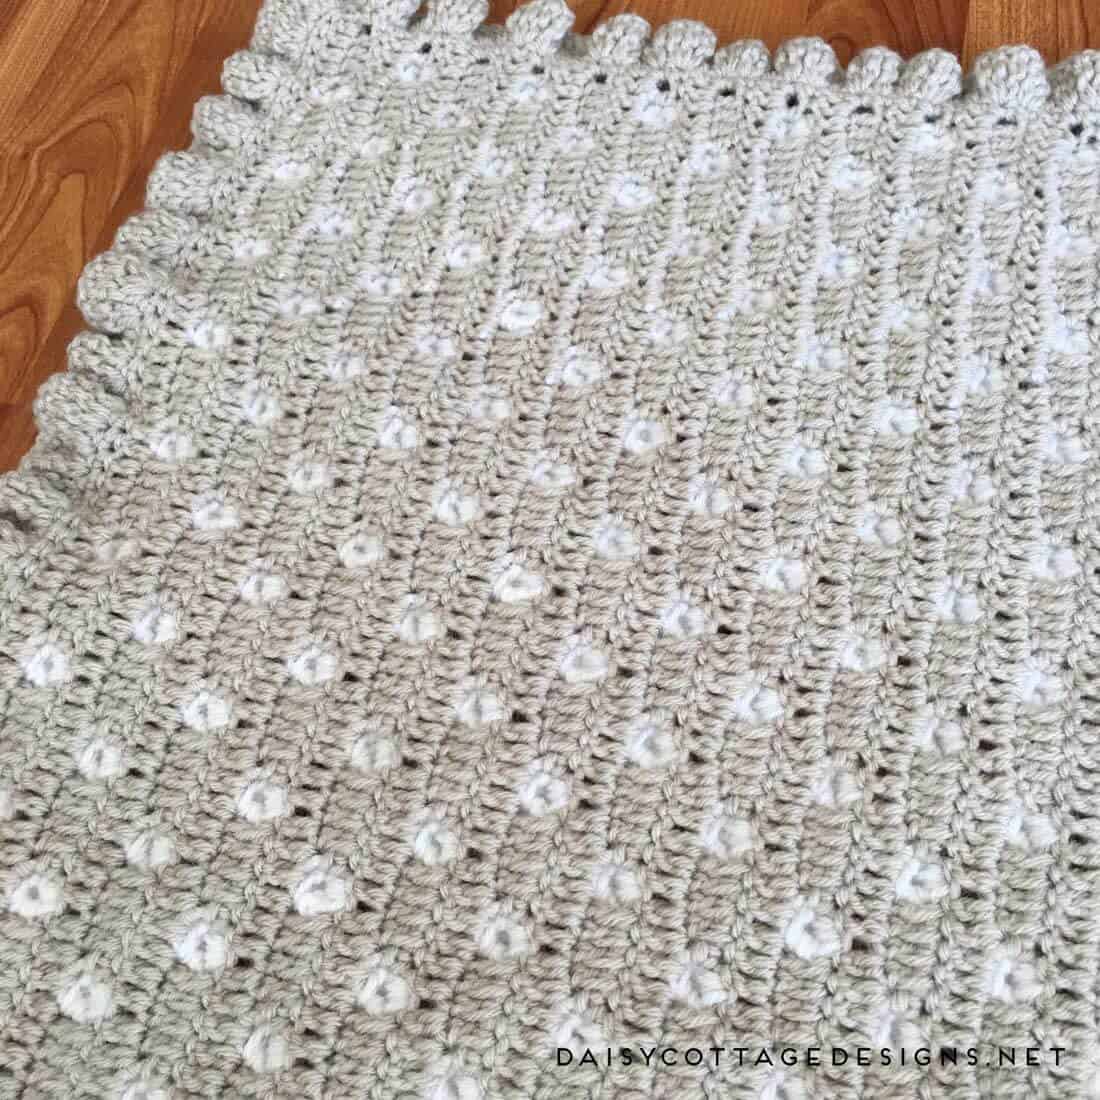 free crochet pattern | crochet blanket pattern | crochet baby blanket | polkadot blanket | Daisy Cottage Designs | Use this free crochet baby blanket pattern to make an adorable baby shower gift. Or, make a larger size and throw it over your couch, chair, or bed. It's a beautiful pattern with detailed instructions and a video tutorial. 